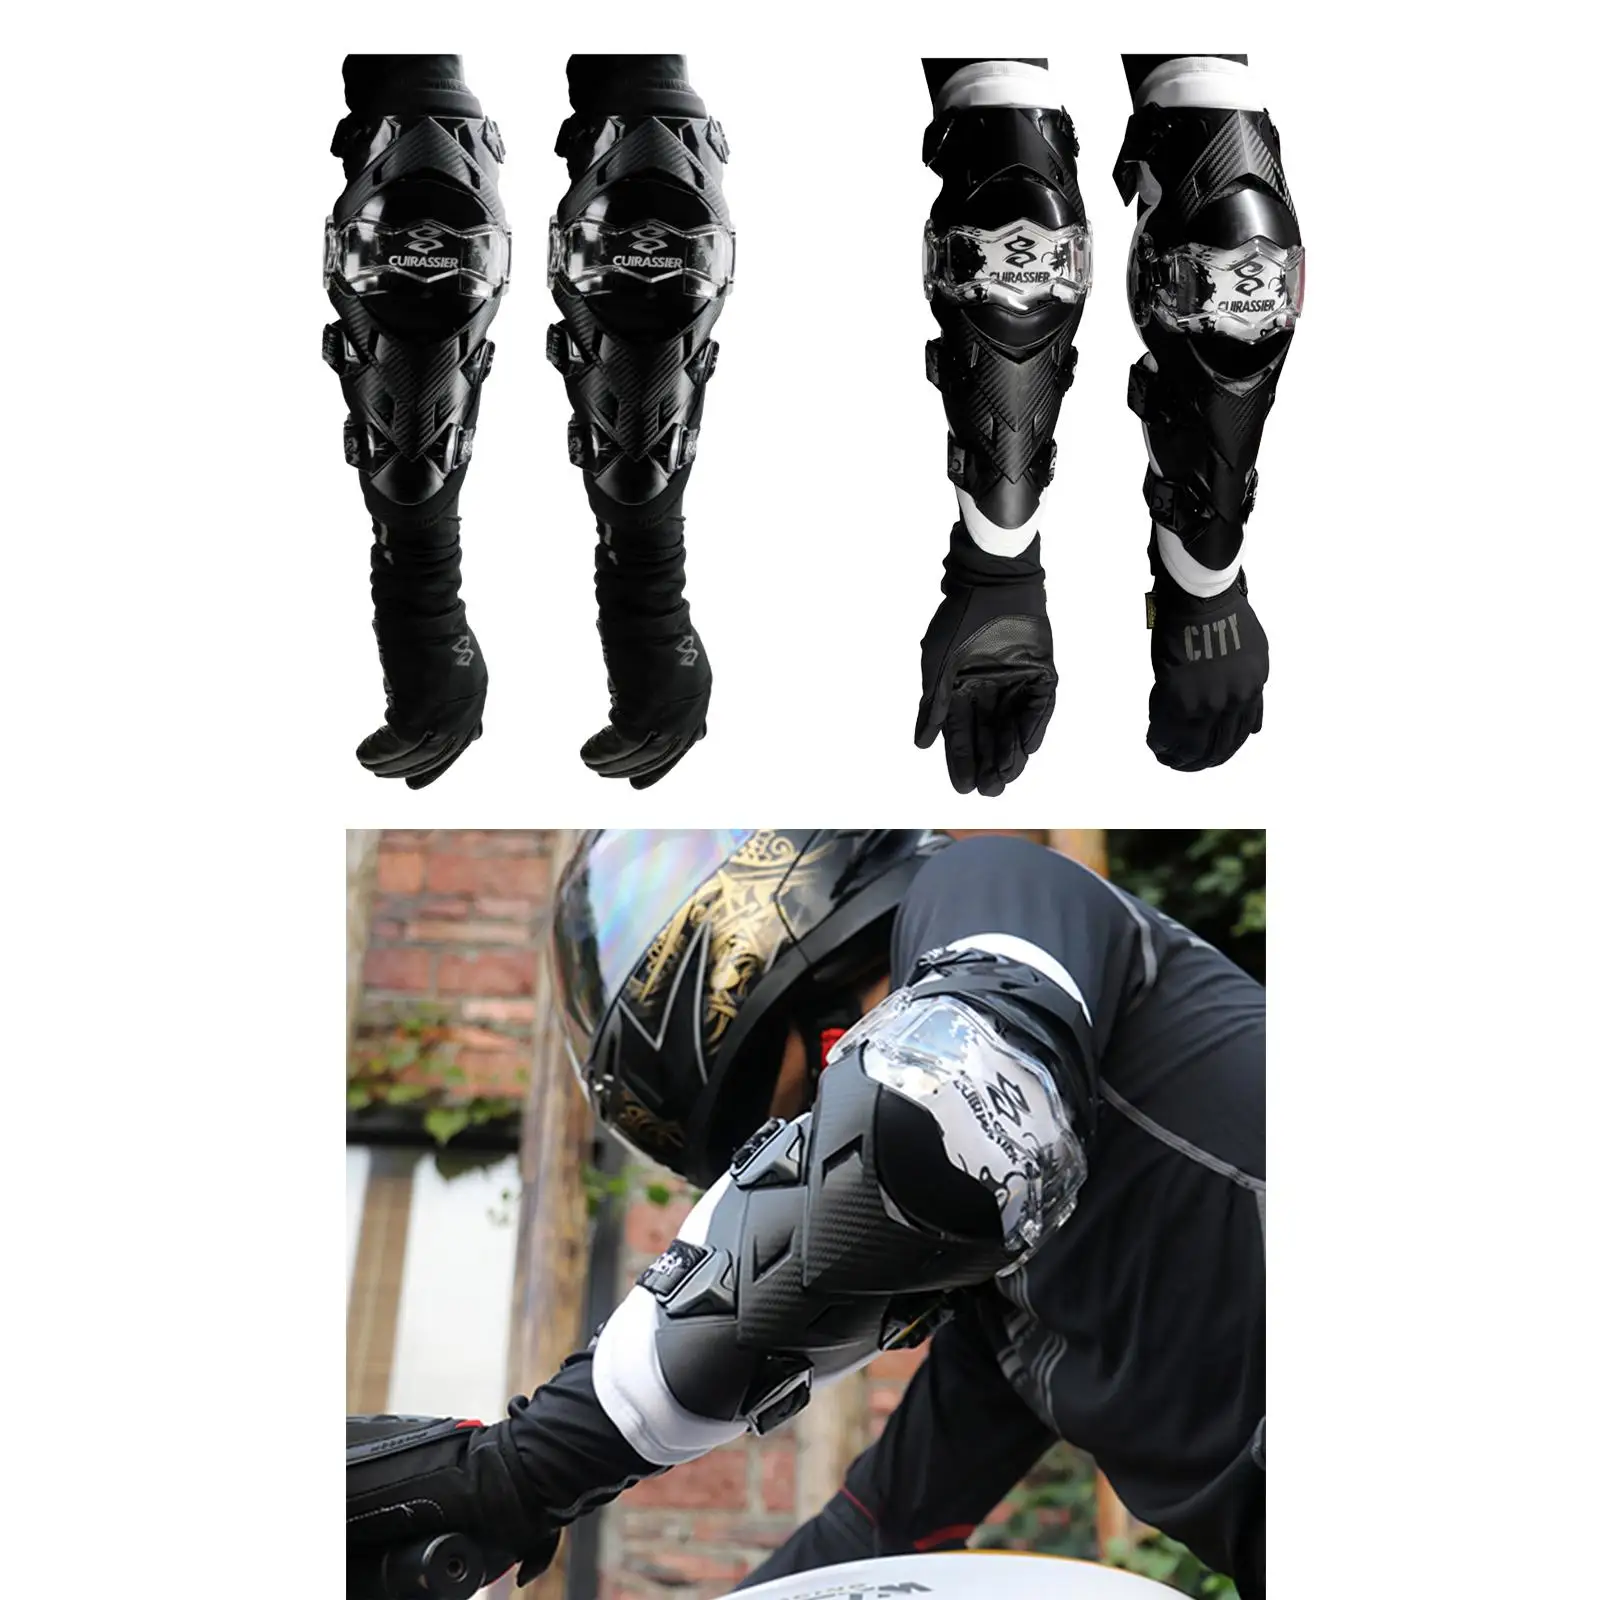 Motorcycle Elbow Protector,Cuirassier Elbow Pads Motocross Racing Downhill Dirt Bike Protection Elbow Guards Black